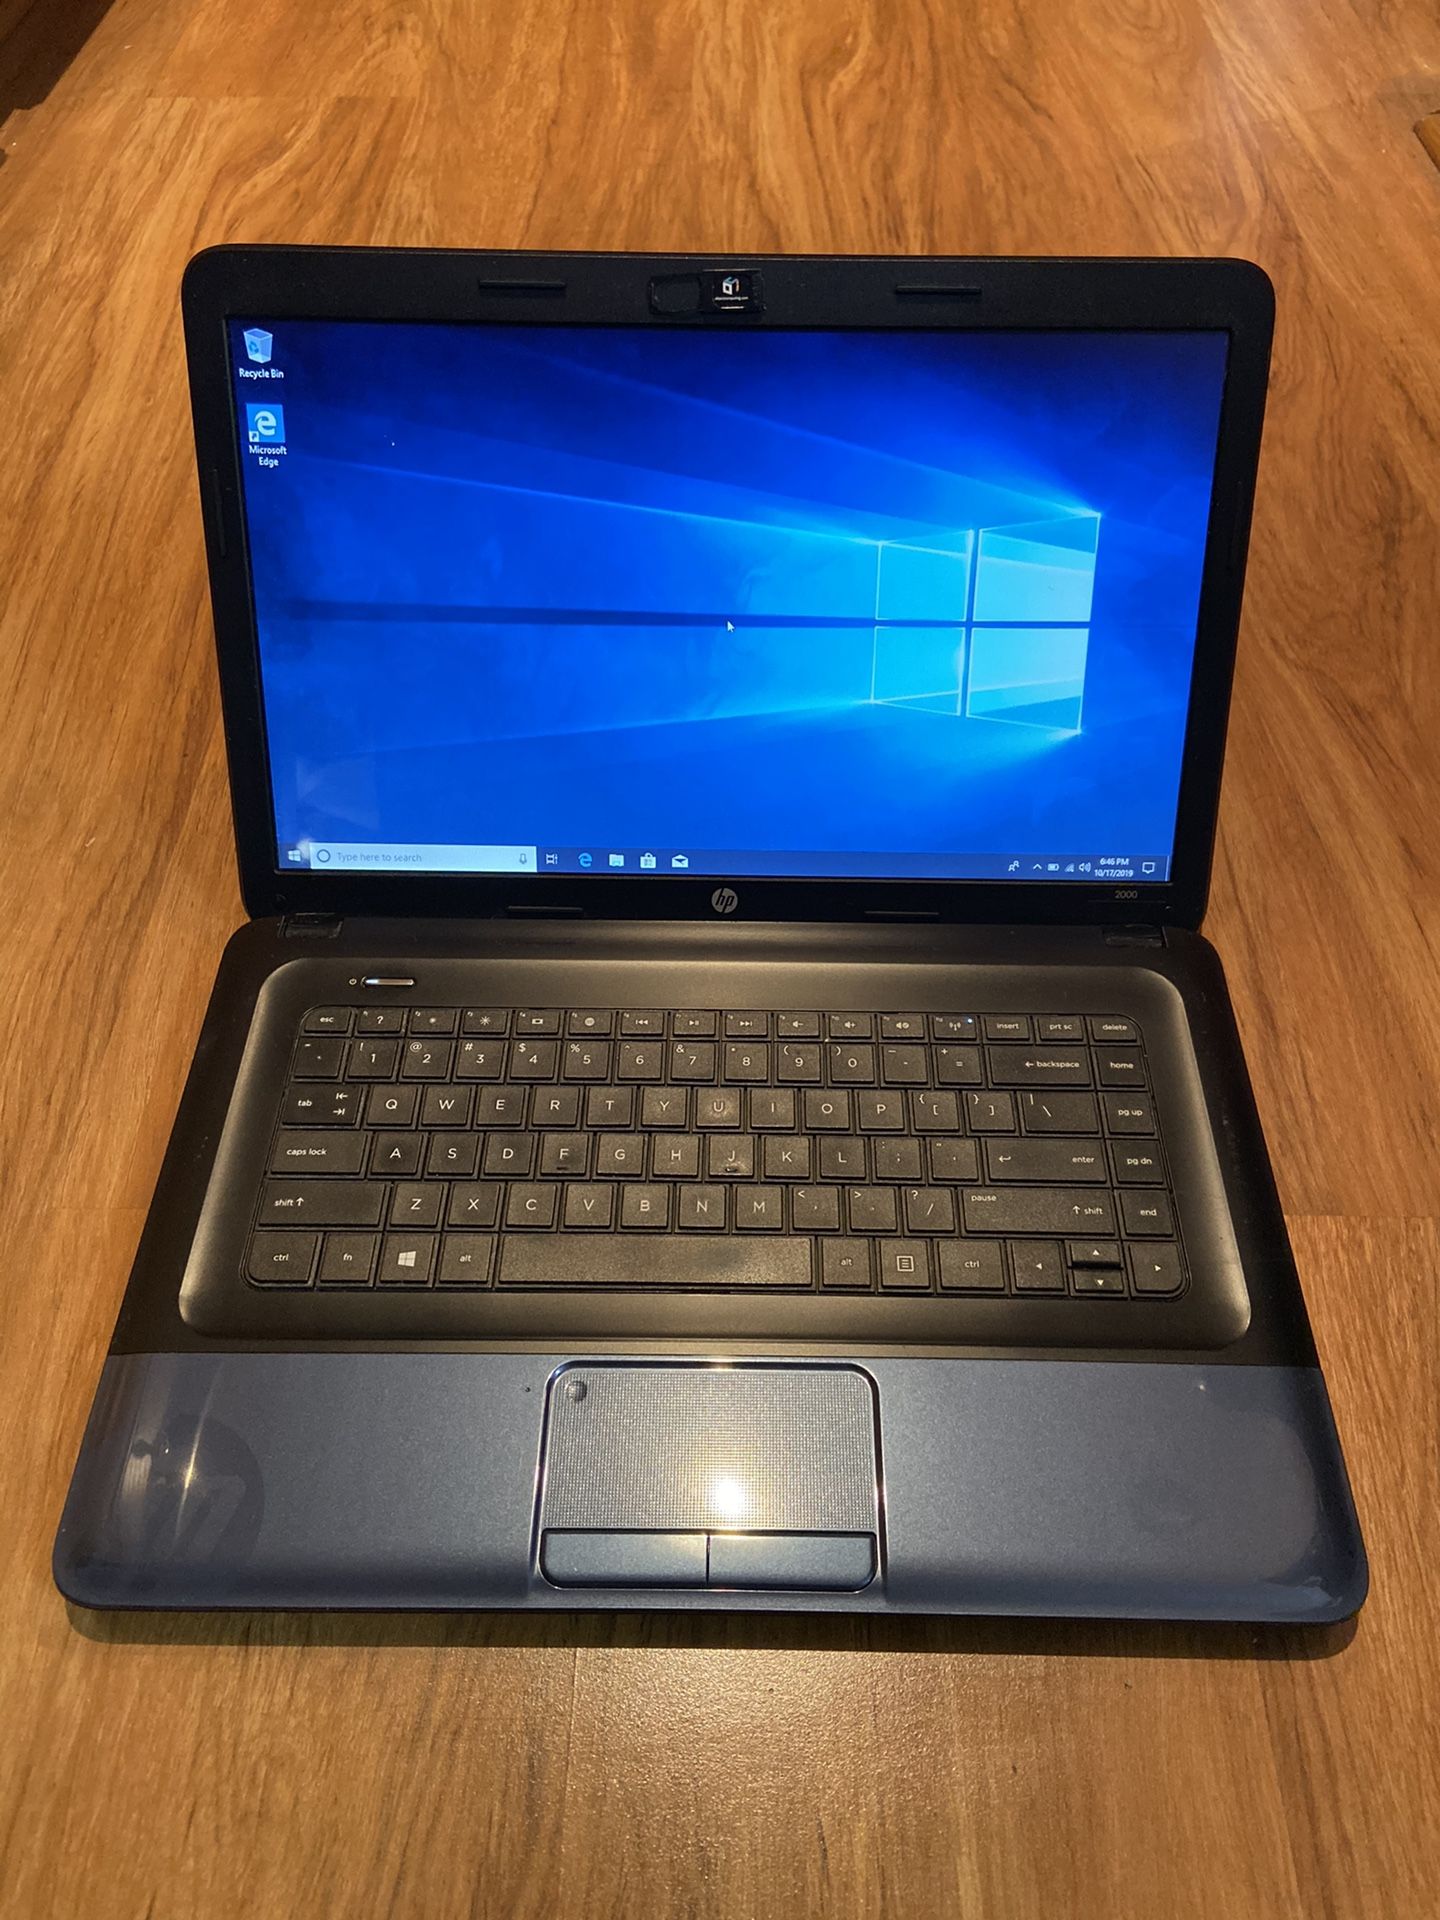 HP 2000 4GB Ram 160GB Hard Drive 15.6 inch HD Windows 10 Pro Laptop with HDMI output & charger in Excellent Working condition!!!!!!!!